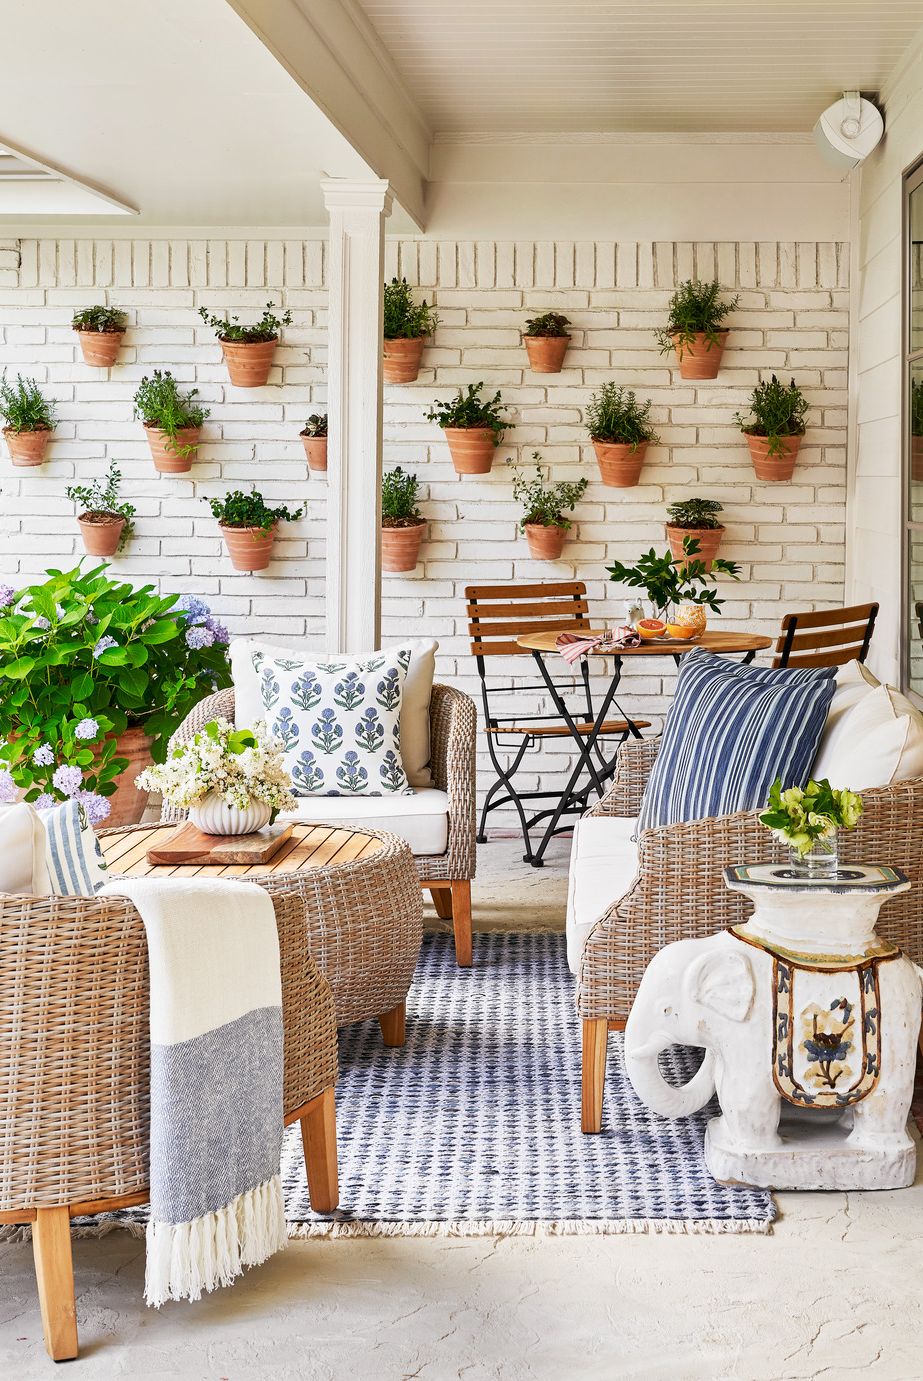 26 Deck Storage Ideas to Organize Your Outdoor Space